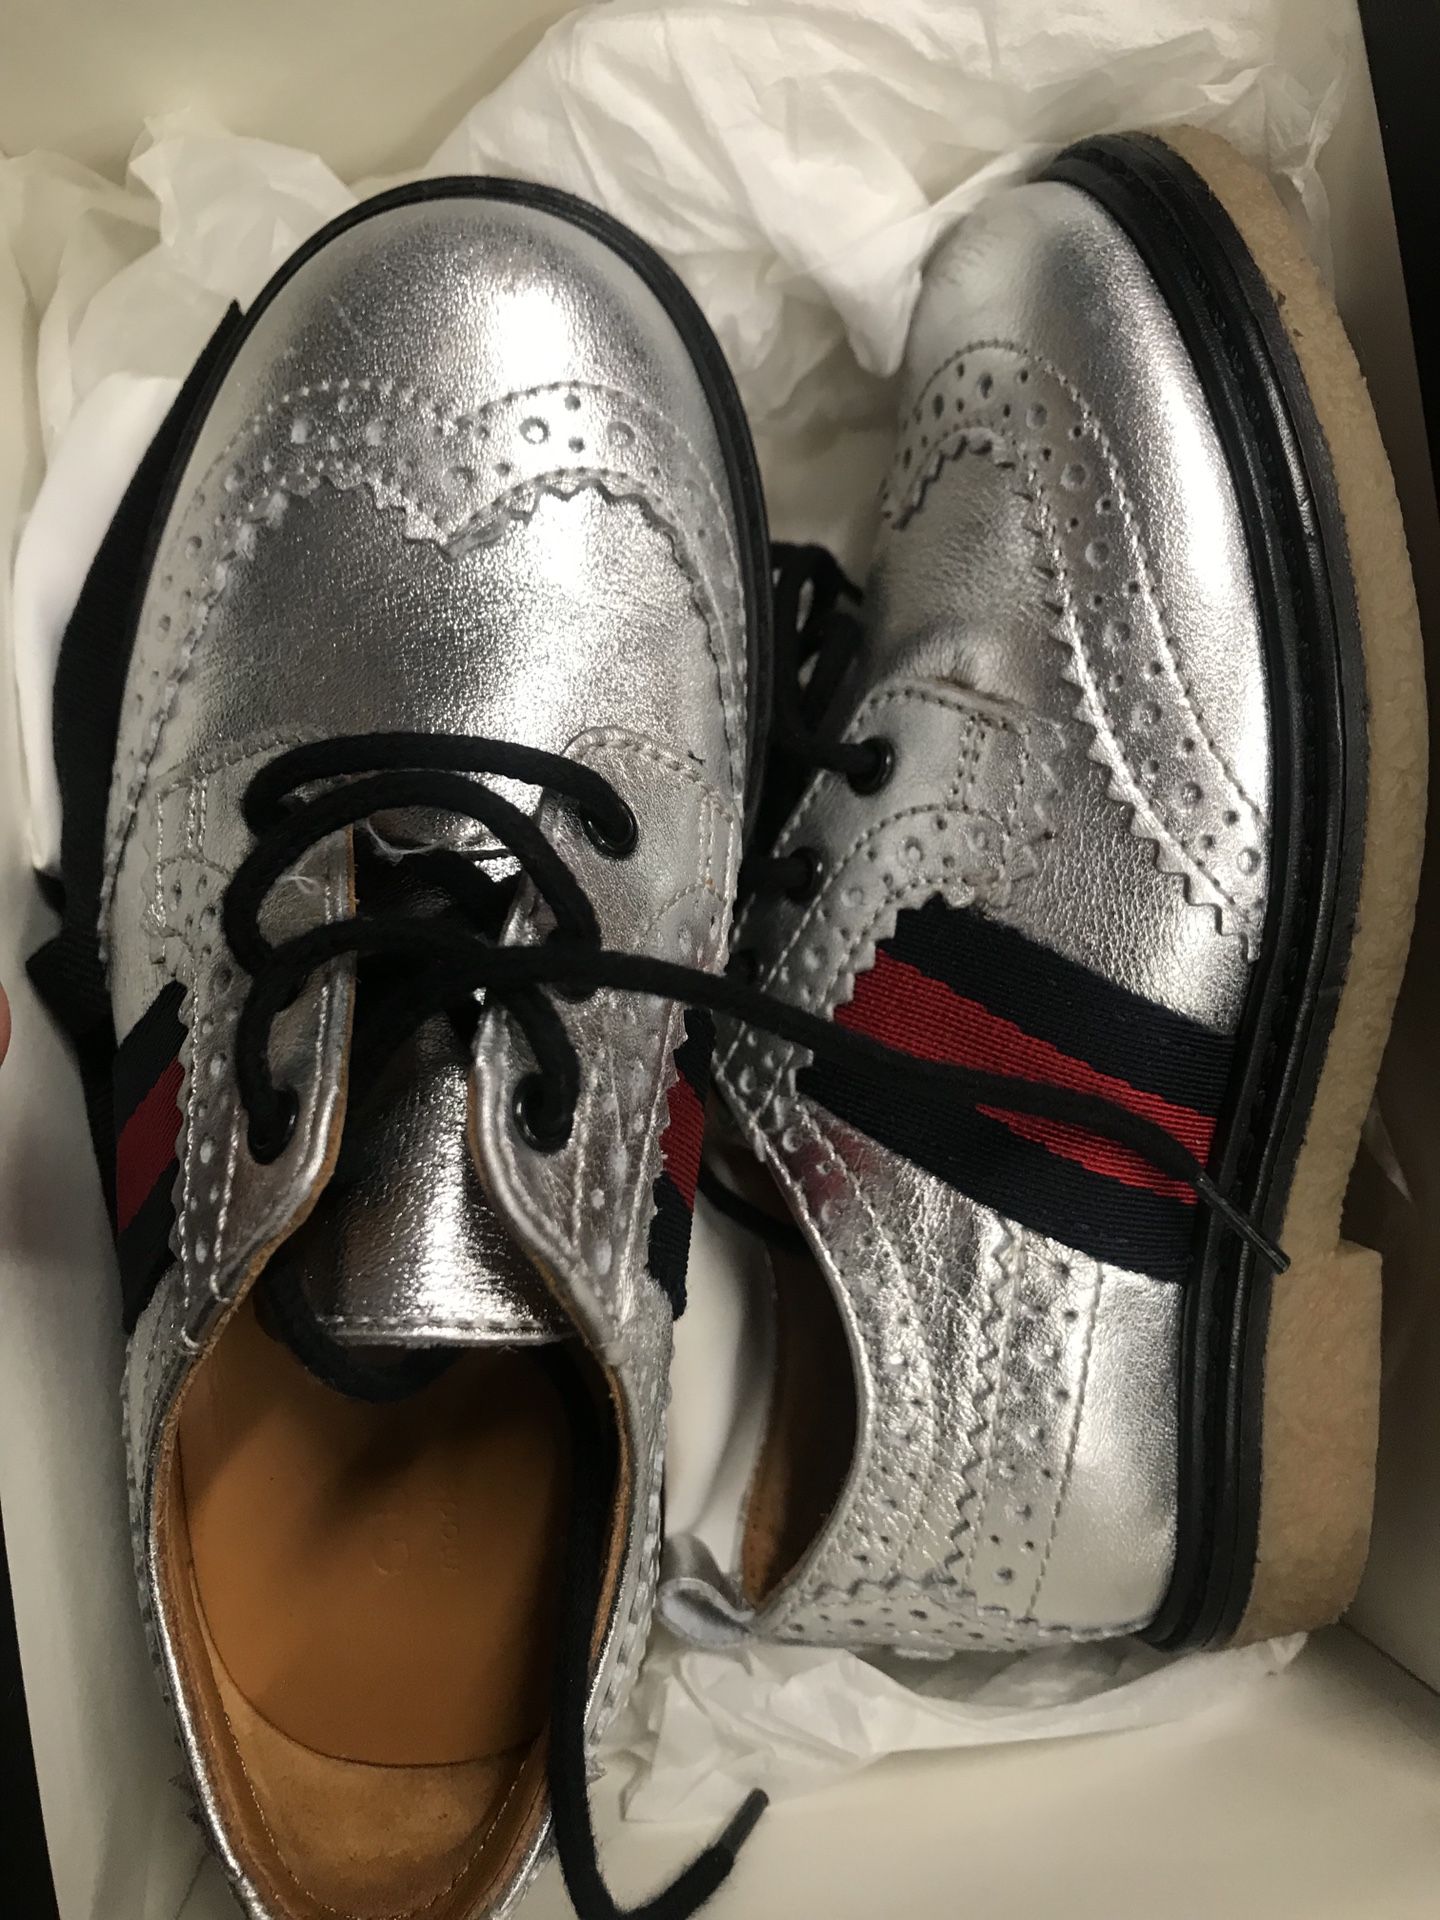 Gucci metallic children shoes size 7. Asking $175 or best offer. Paid $410. (Serious inquiries only please). Little boys size 7